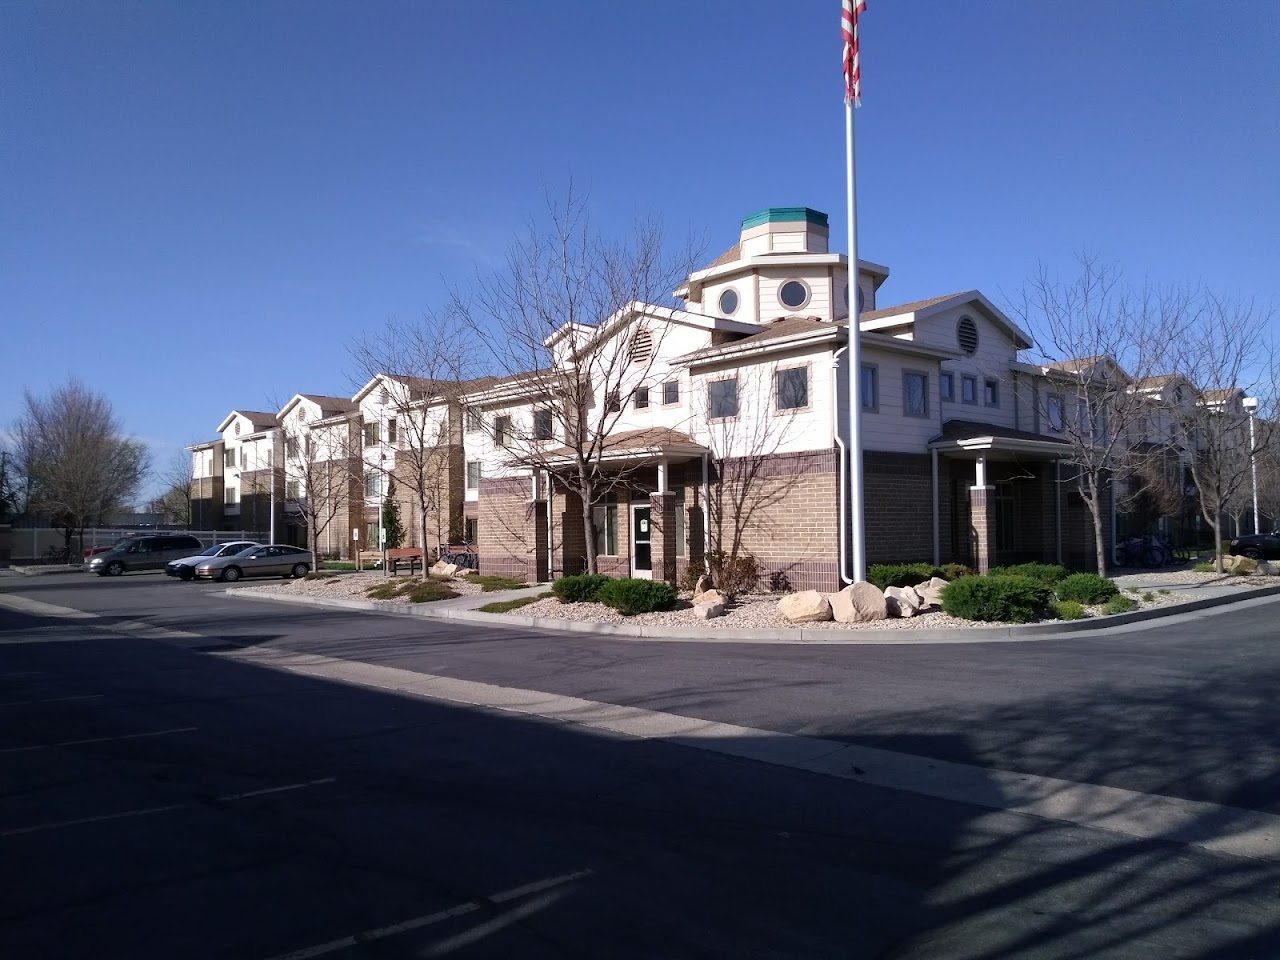 Photo of GRACE MARY MANOR. Affordable housing located at 19 WEST GREGSON AVE SOUTH SALT LAKE CITY, UT 84115